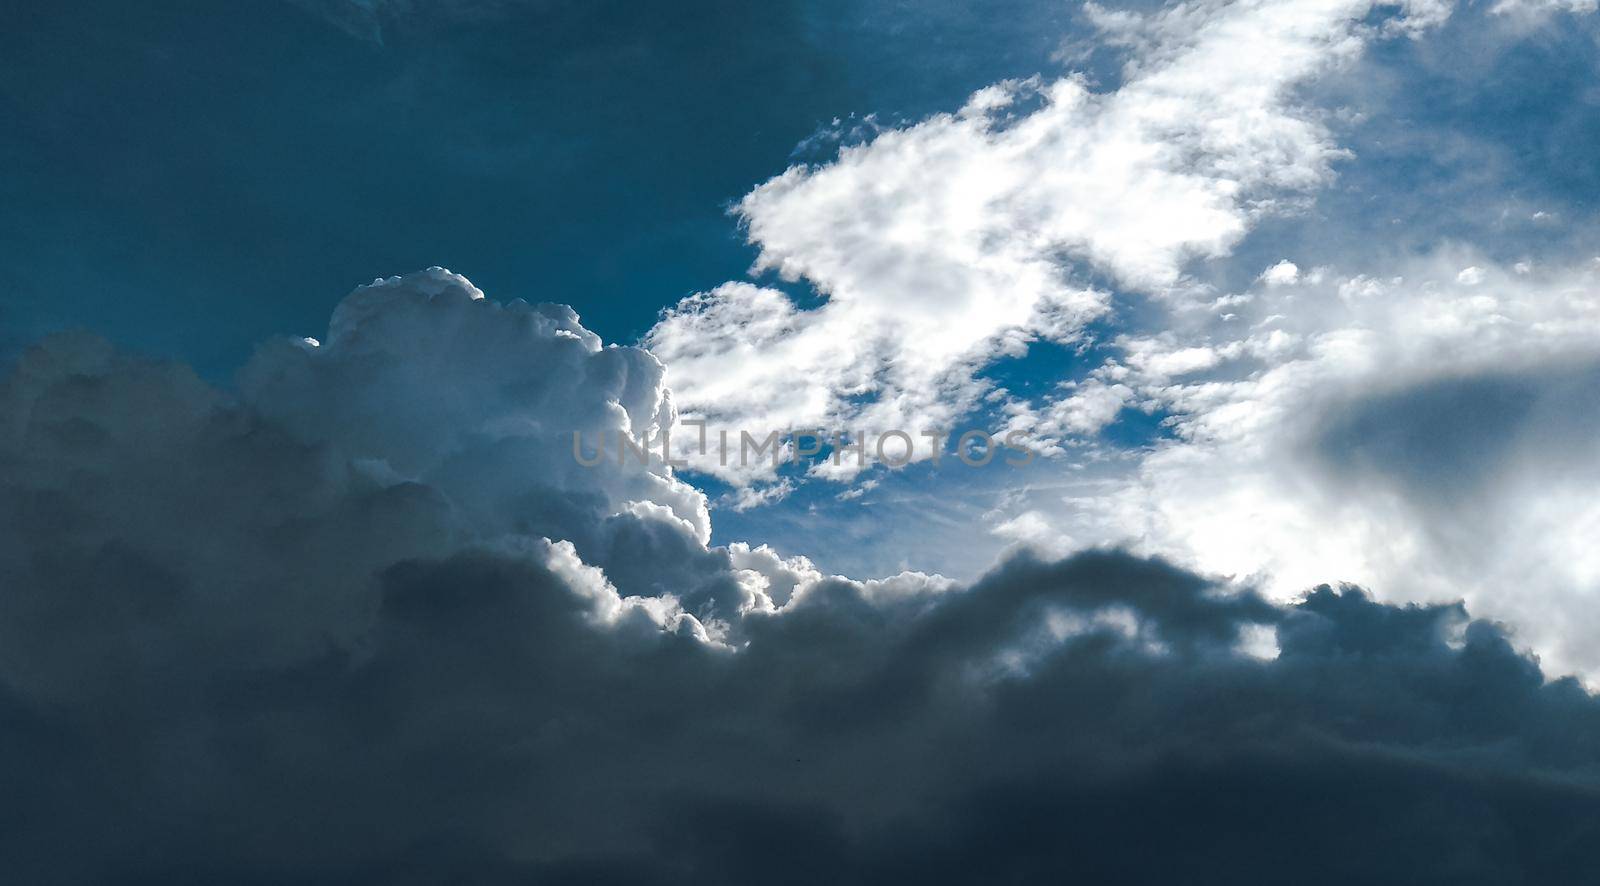 The formation of a cumulus cloud lit by the sun against the background of clouds and blue sky by ProjectStockman